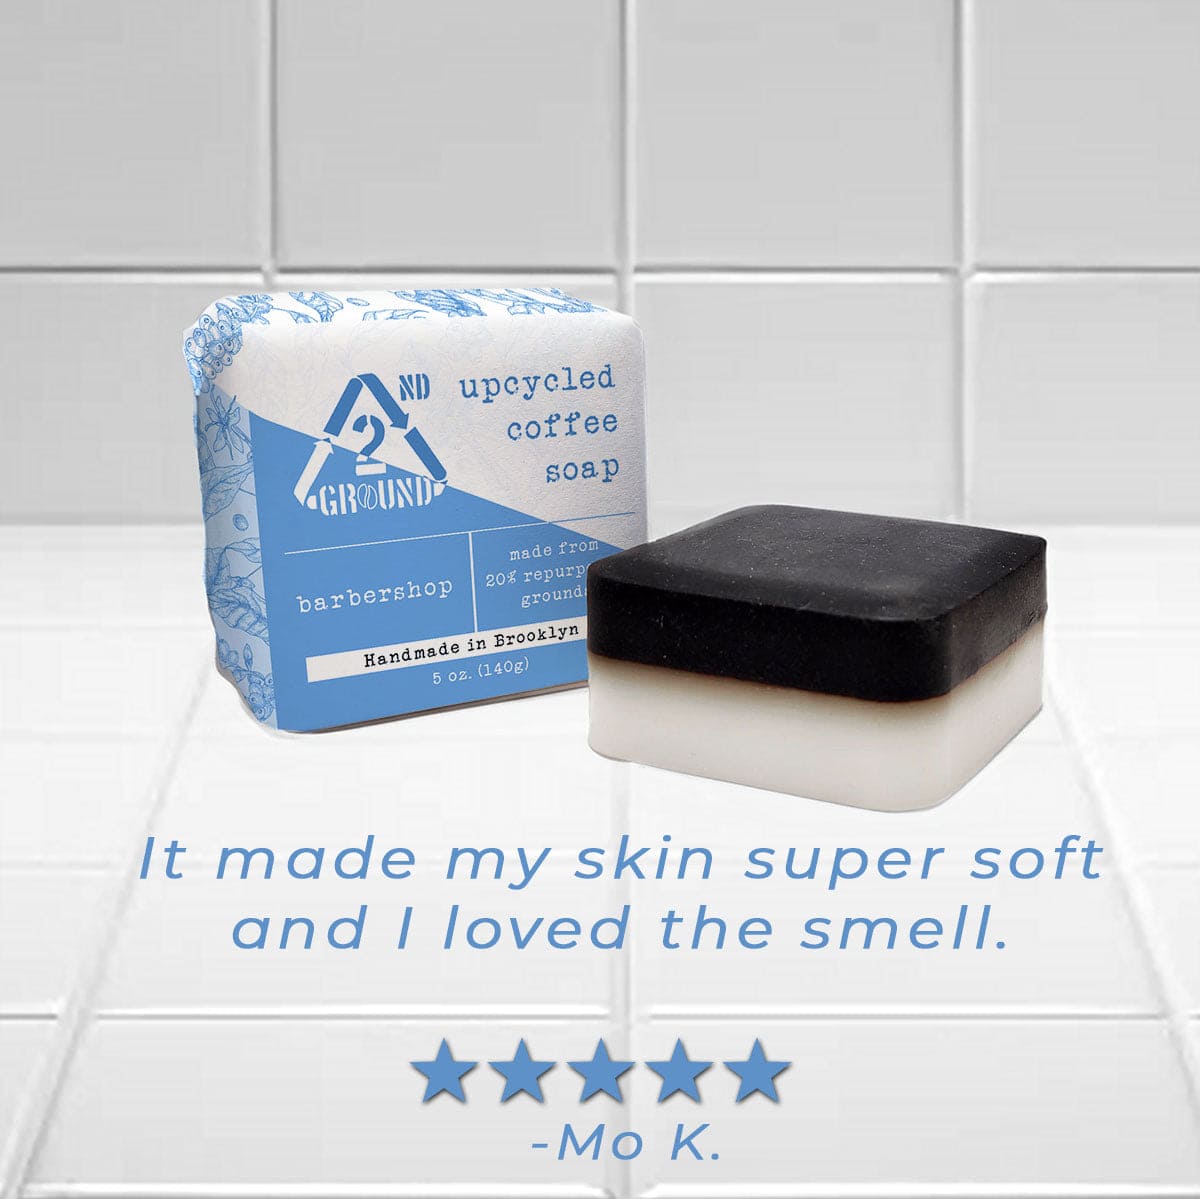 Customer review of barbershop upcycled coffee soap